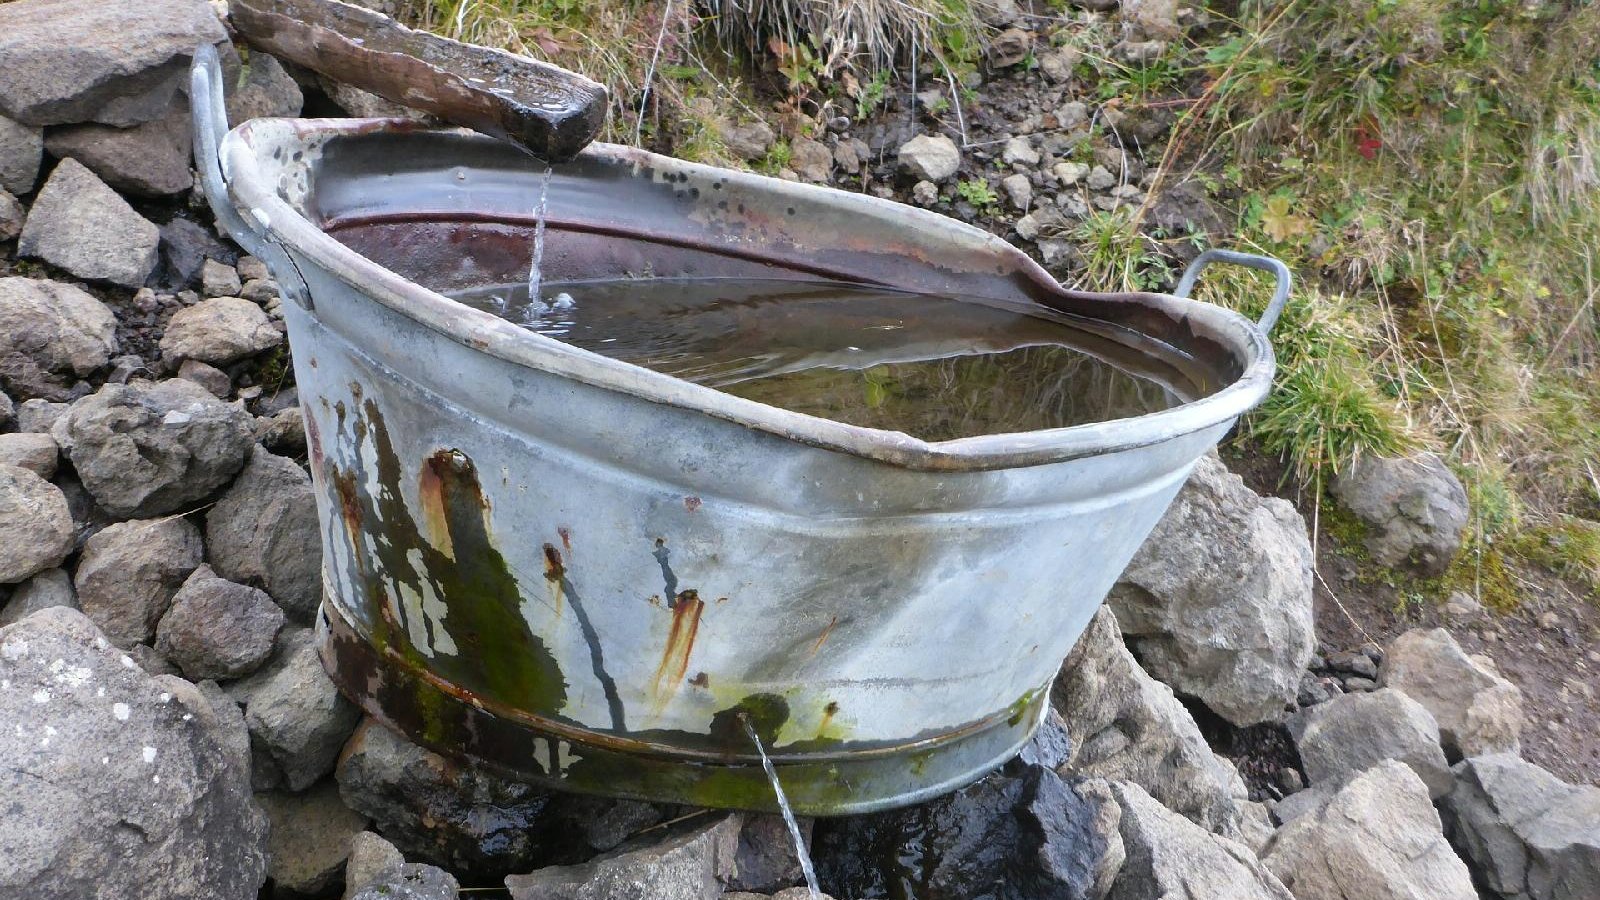 The photo shows a large tin water bowl. The bowl is standing outside on rocks. - grafika artykułu